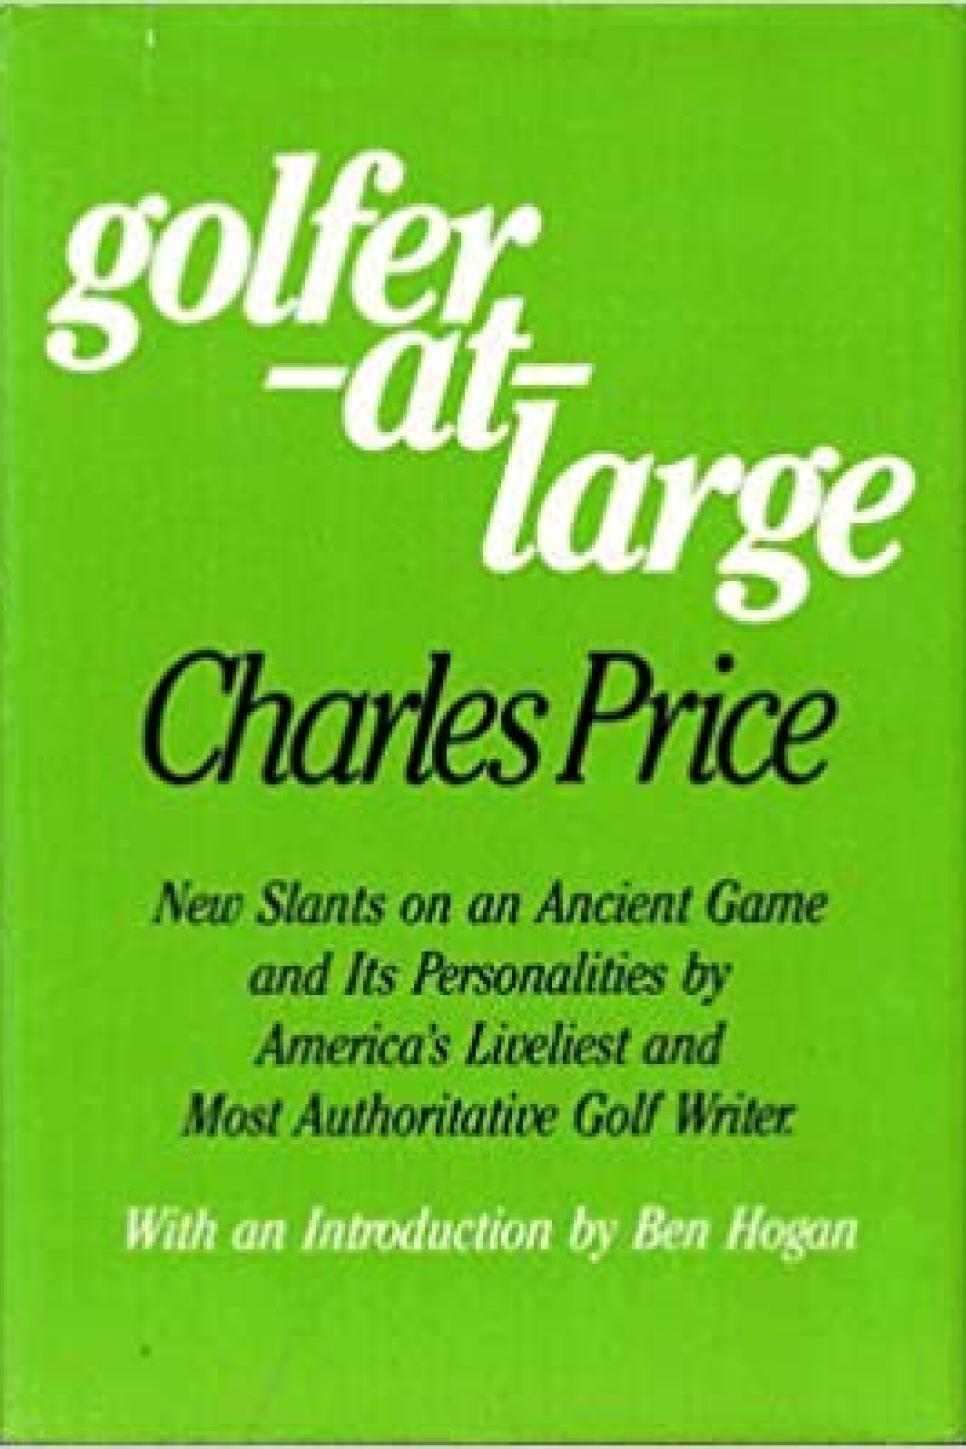 rx-amazongolfer-at-large-new-slants-on-an-ancient-game-by-charles-price-1982.jpeg